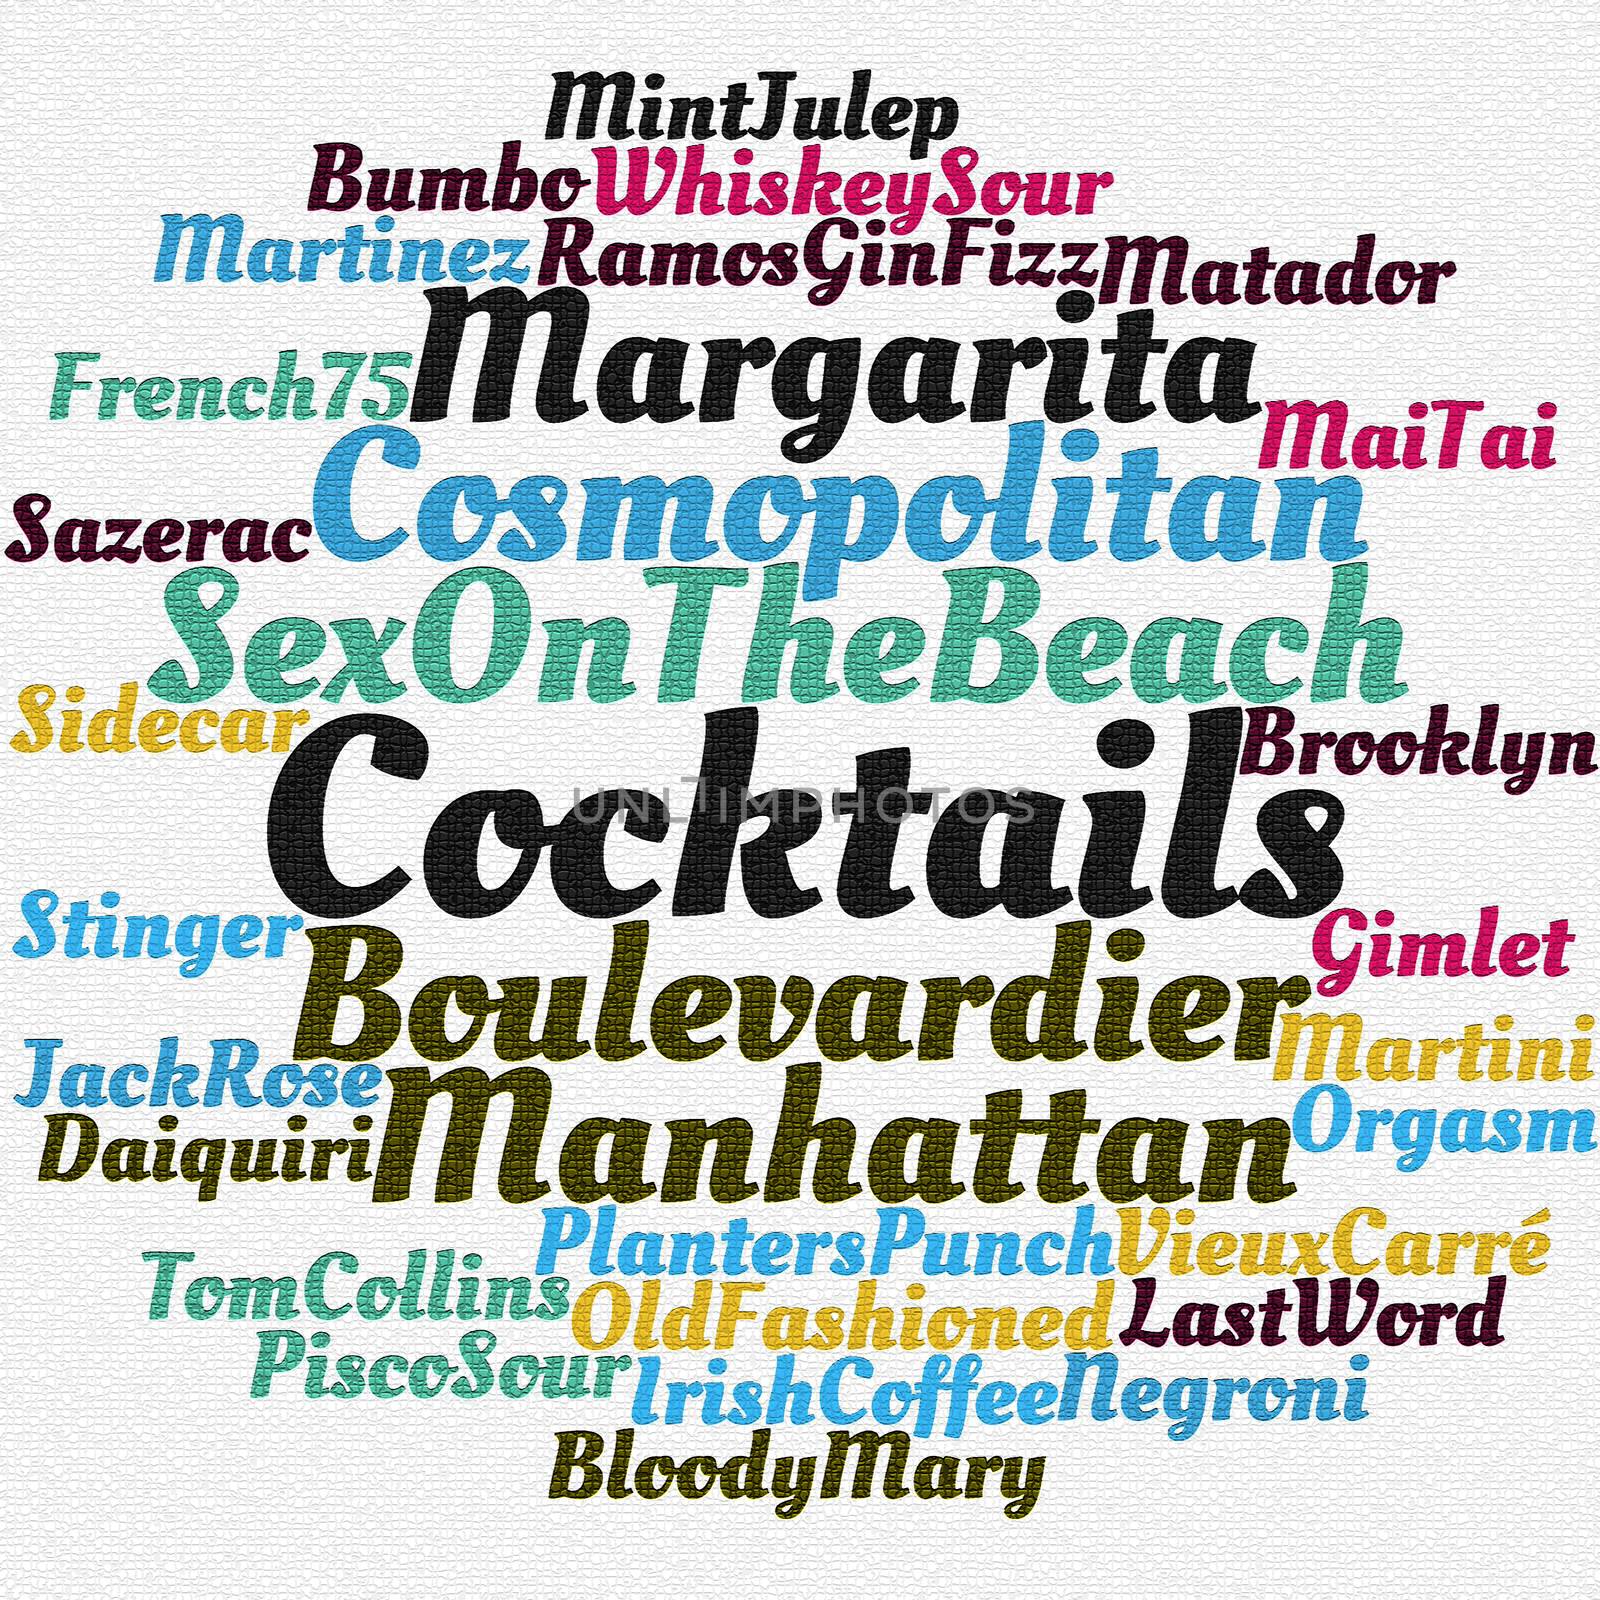 Most popular cocktails word cloud by eenevski